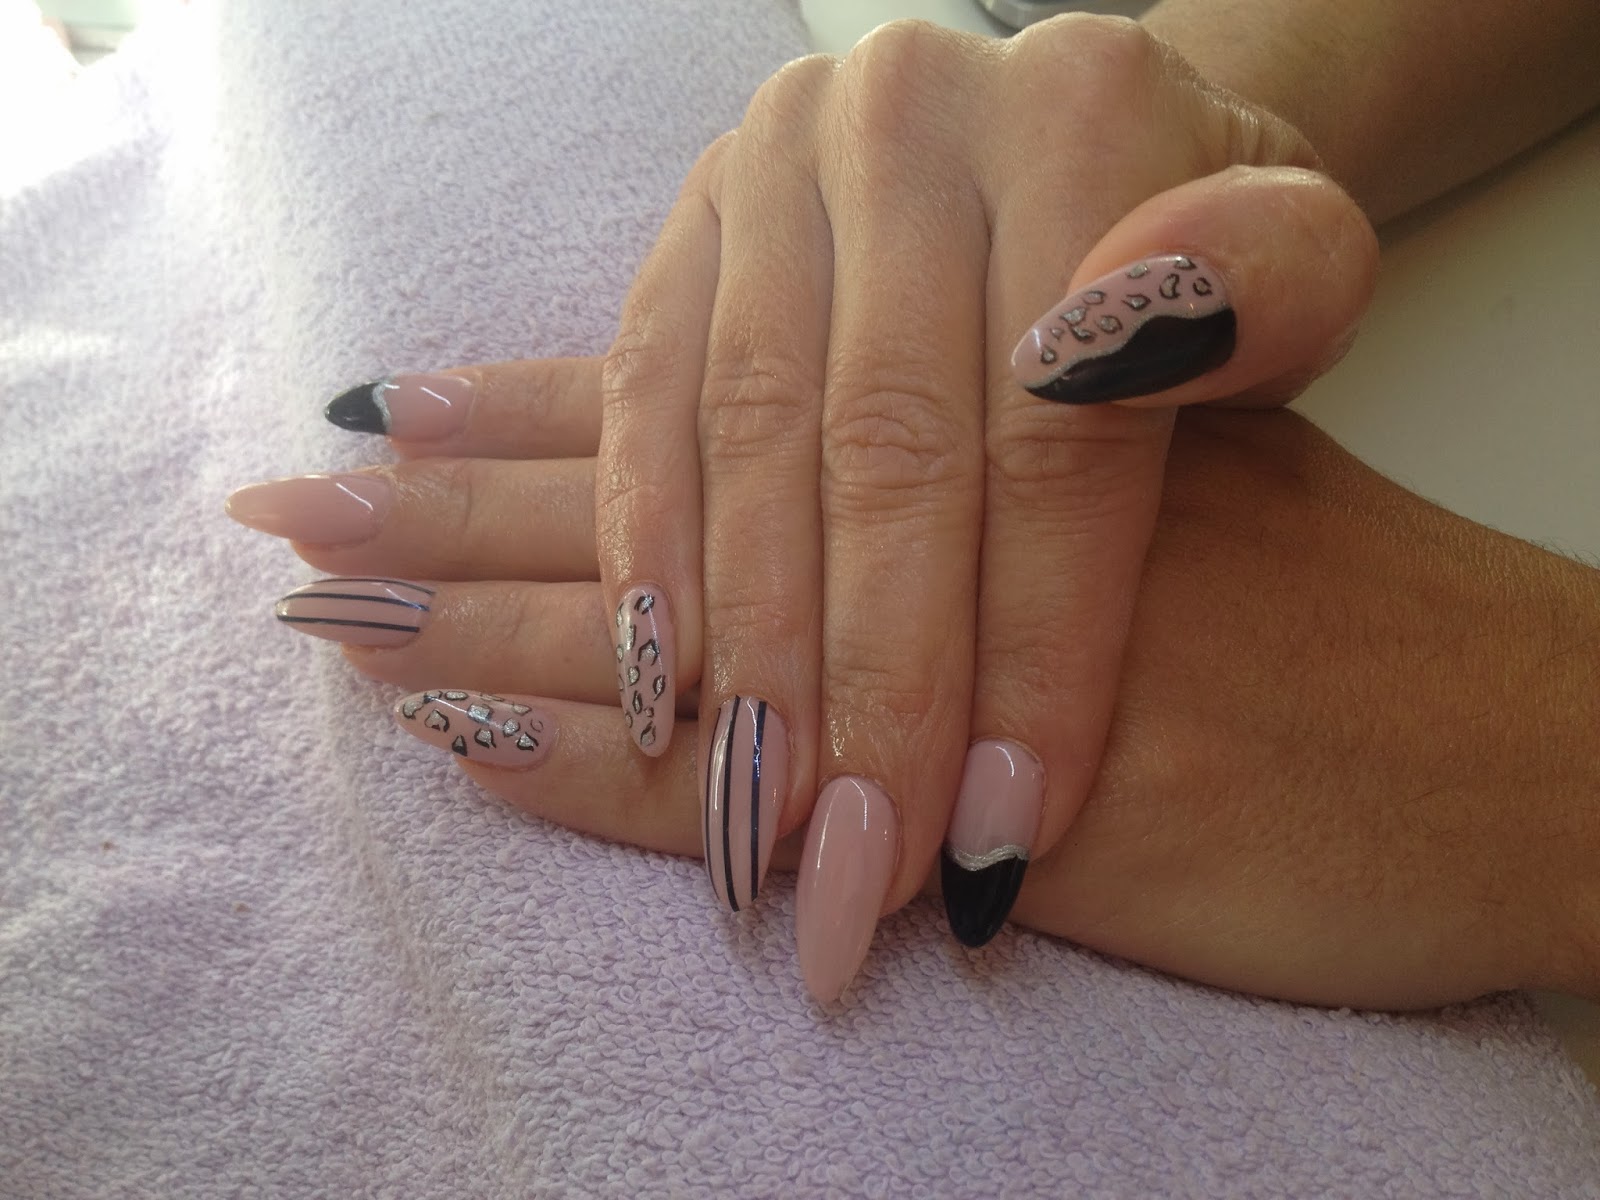 GLAMOUR NAILS: GEL EXTENSIONS